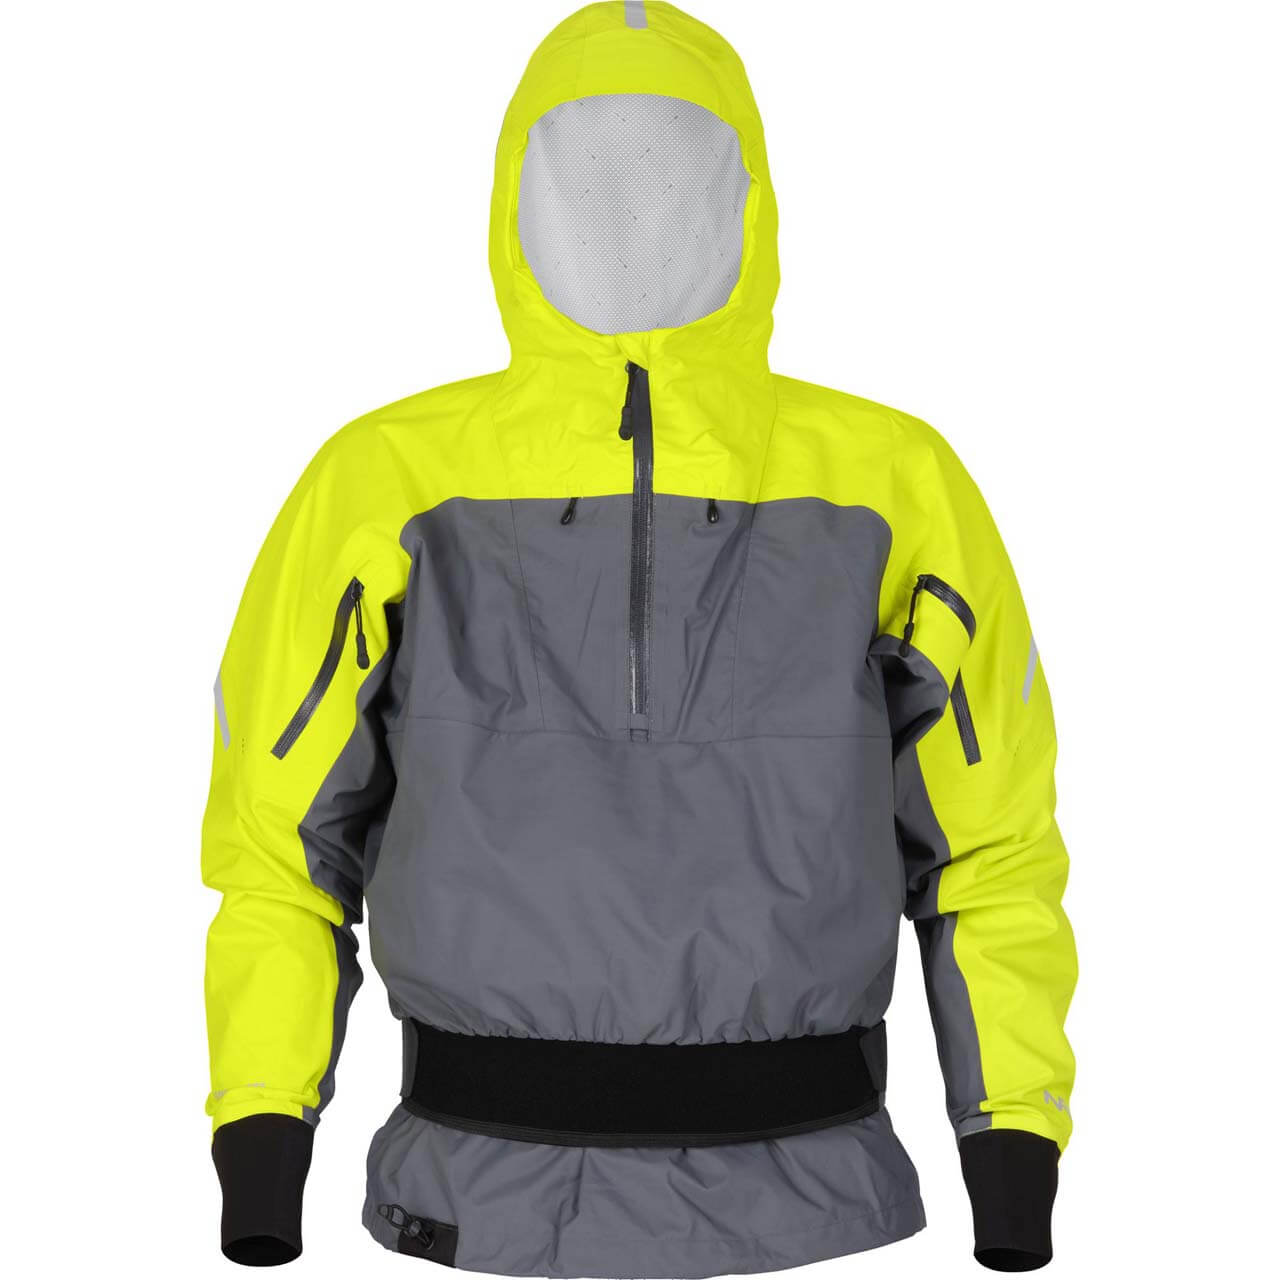 NRS Riptide Touring Paddeljacke - Chartreuse/Gray, XL von NRS}